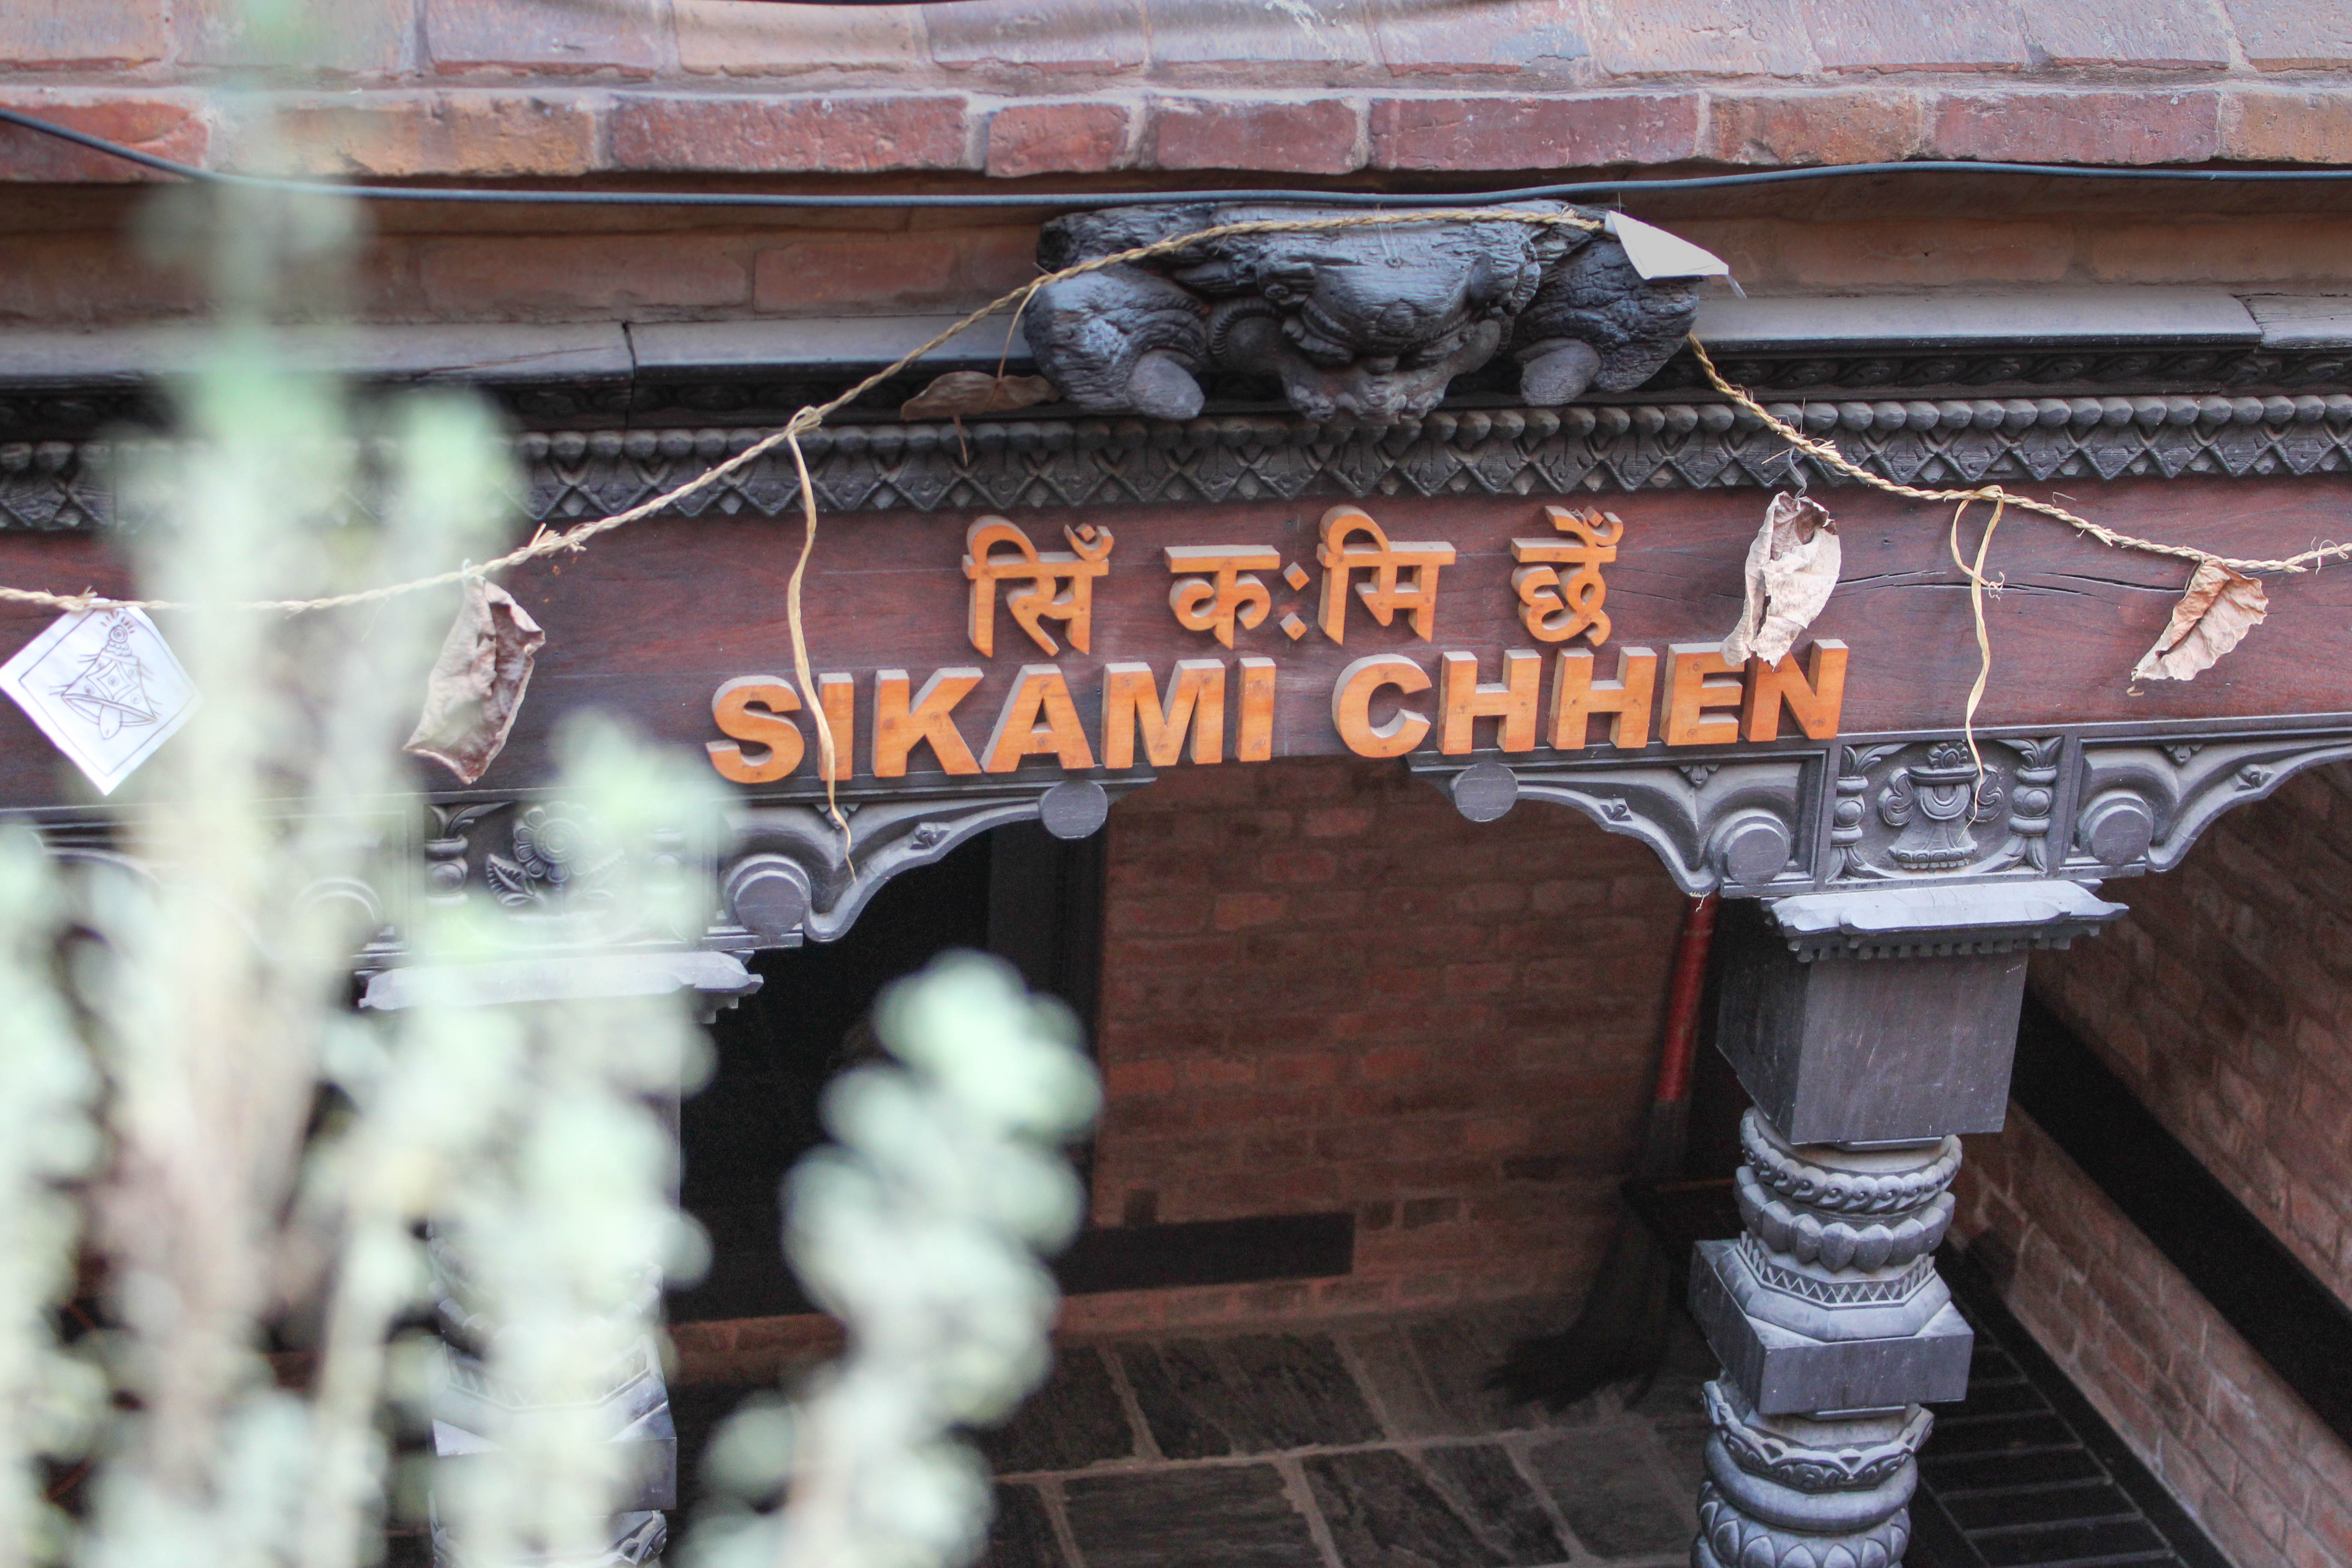 Sikami Chhen: A dream of one family, inspiration for many